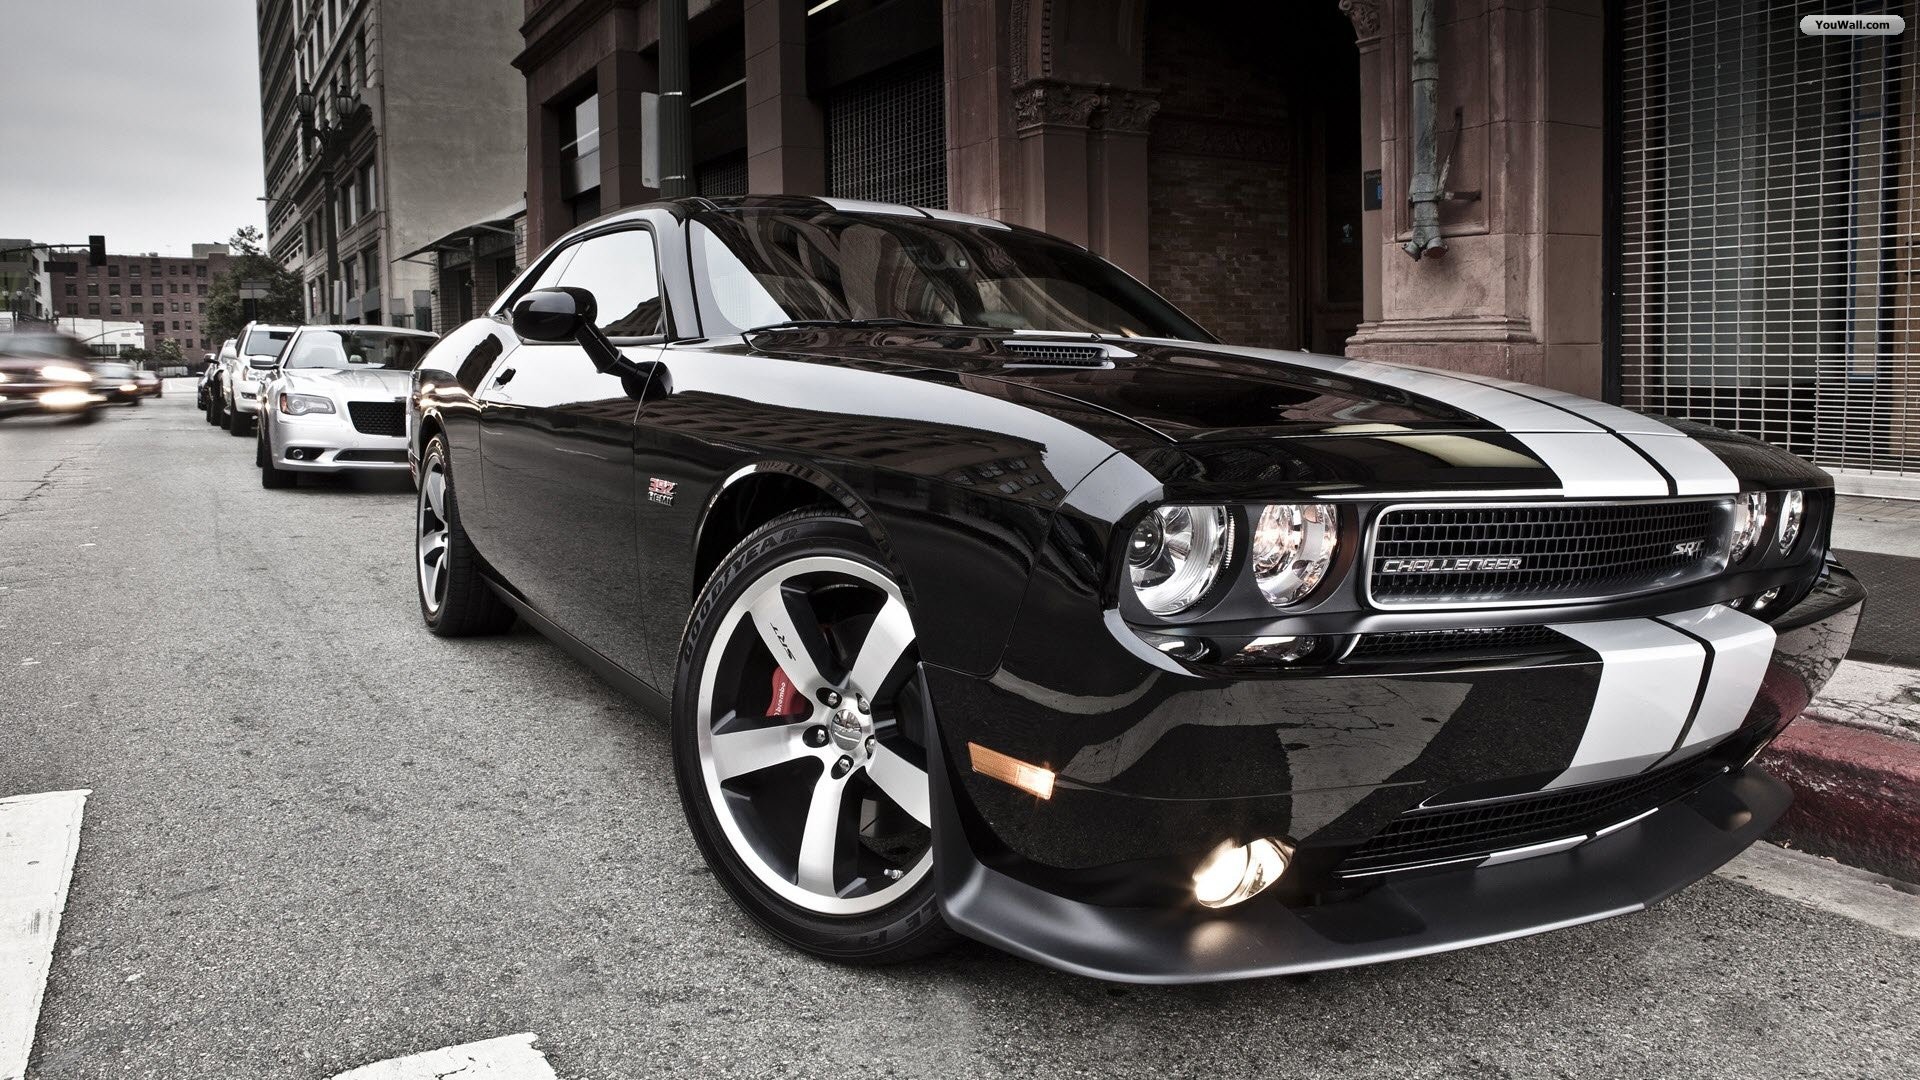 1920x1080 undefined Dodge Challenger Backgrounds (40 Wallpapers) | Adorable Wallpapers